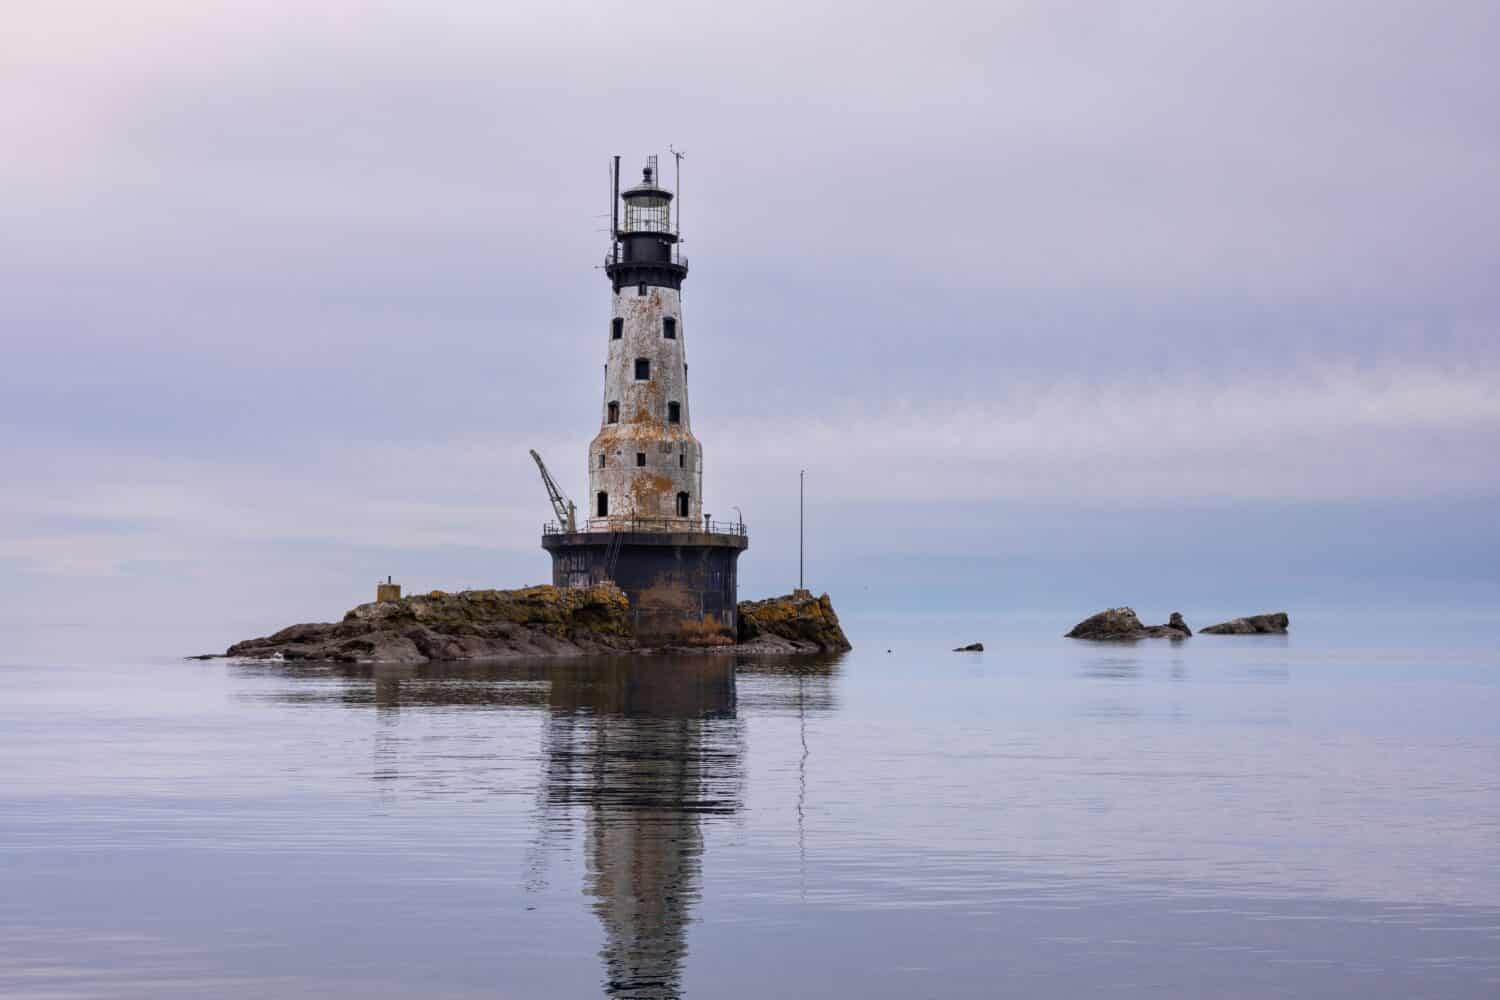 Rock of Ages Lighthouse - An offshore lighthouse on Lake Superior.